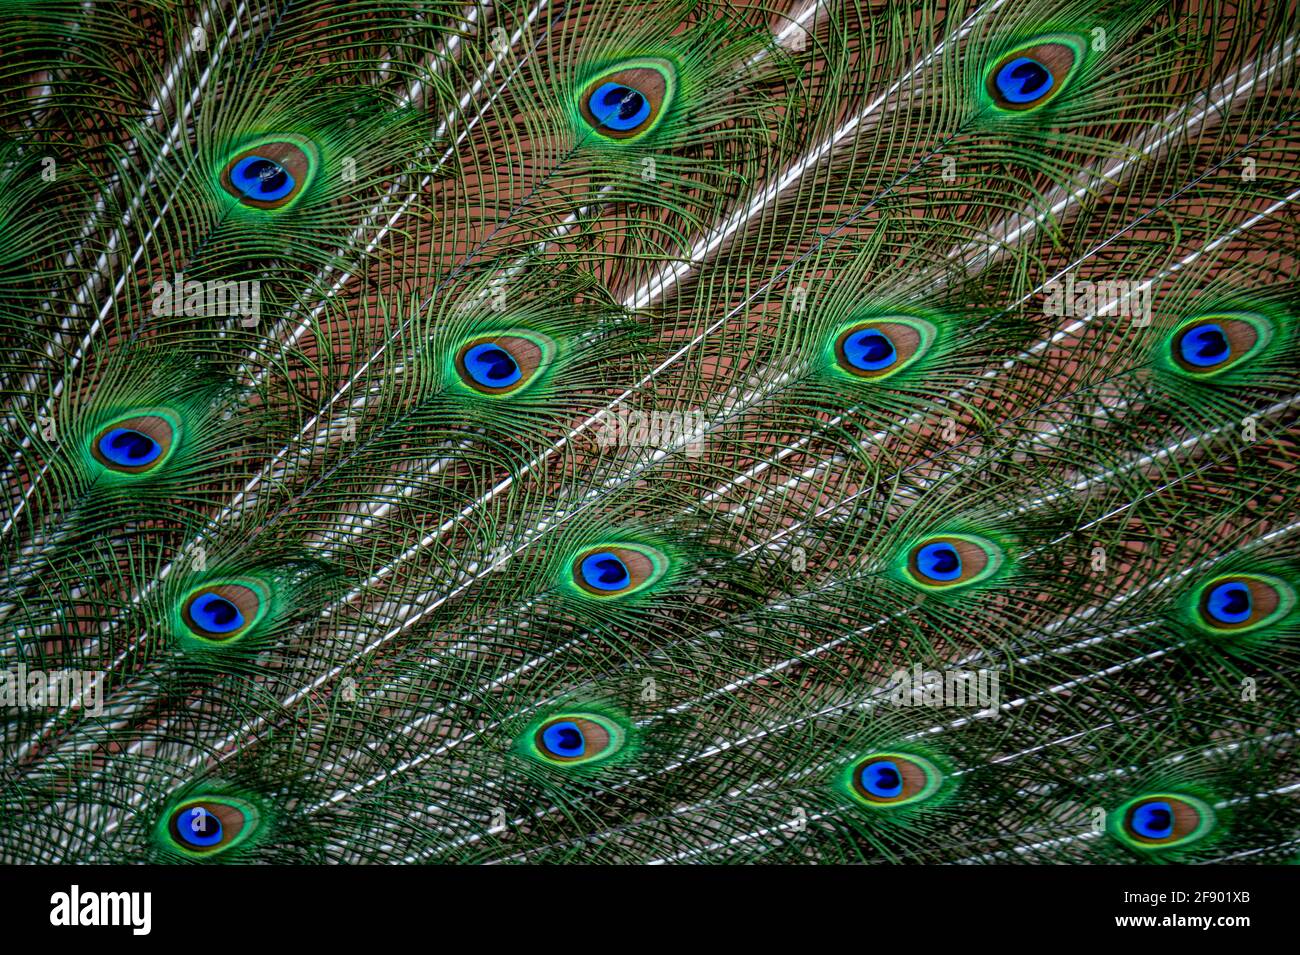 Peacock feather close up. Male Indian peafowl. Metallic blue and green plumage. Quill feathers. Natural pattern with eyespots. Beauty in nature. Stock Photo